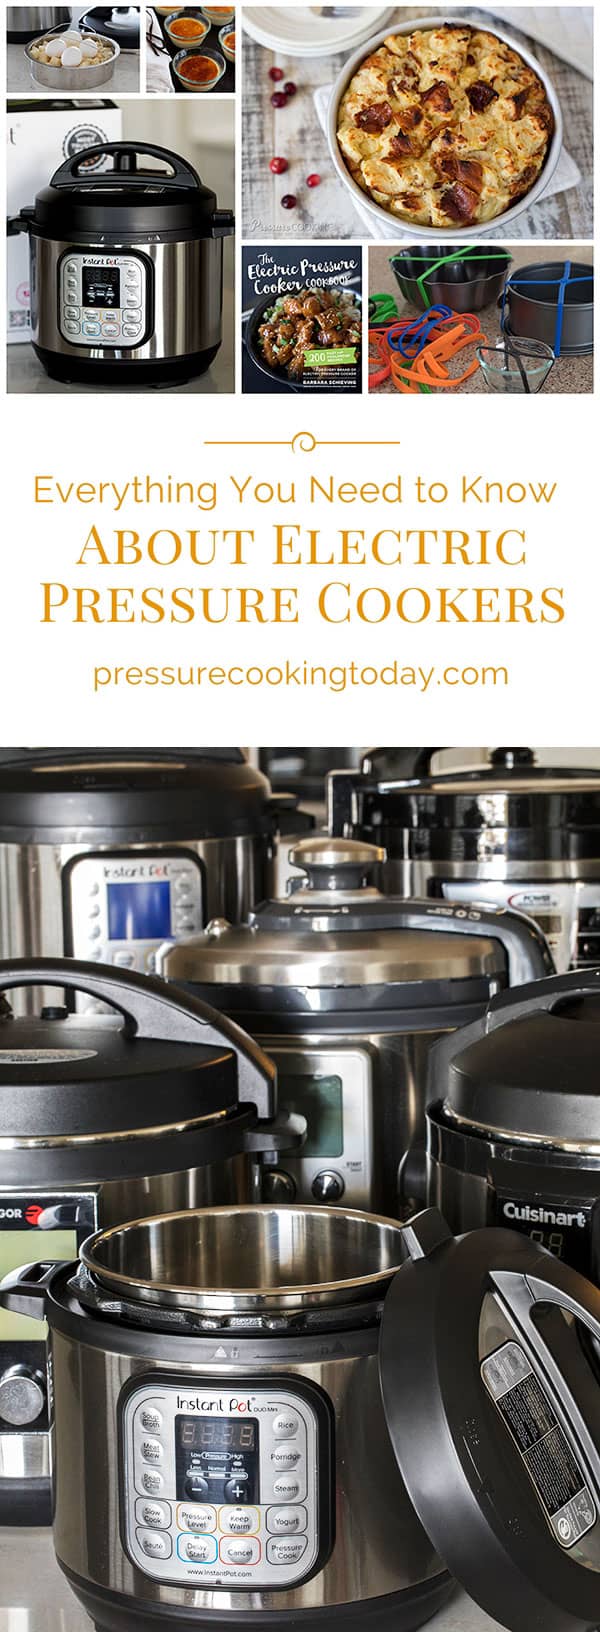 Want to learn how to use an Instant Pot or other multicooker? Here\'s everything you need to know about electric pressure cookers, plus reviews and recipes!